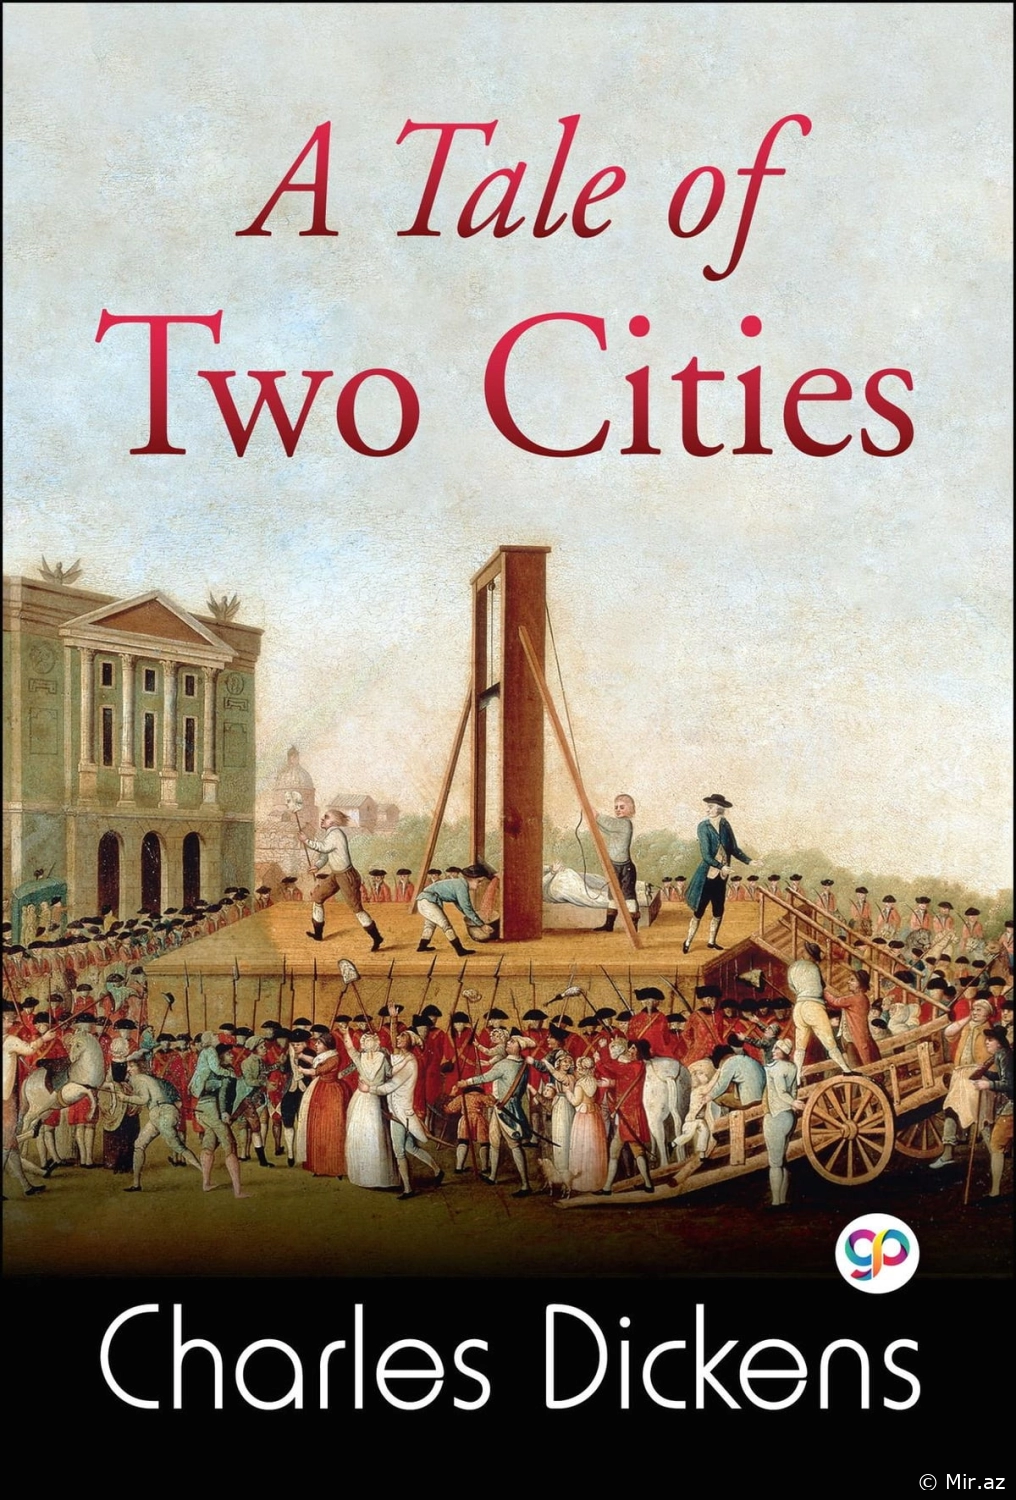 Charles Dickens "A Tale of Two Cities" PDF